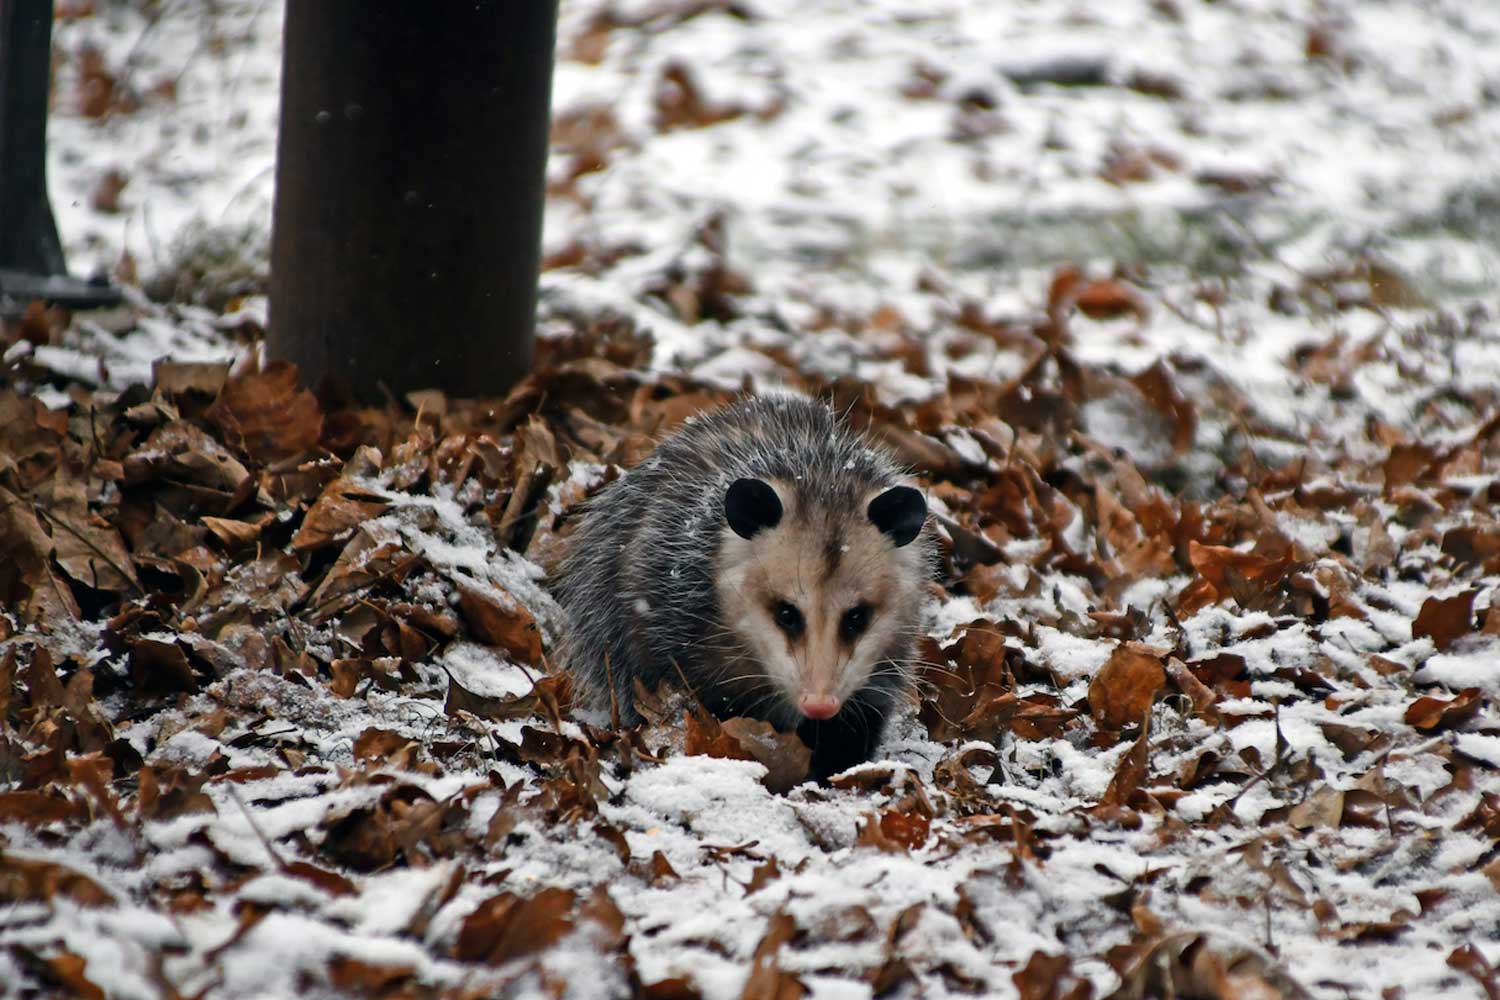 Opossum walking through leaves and snow.